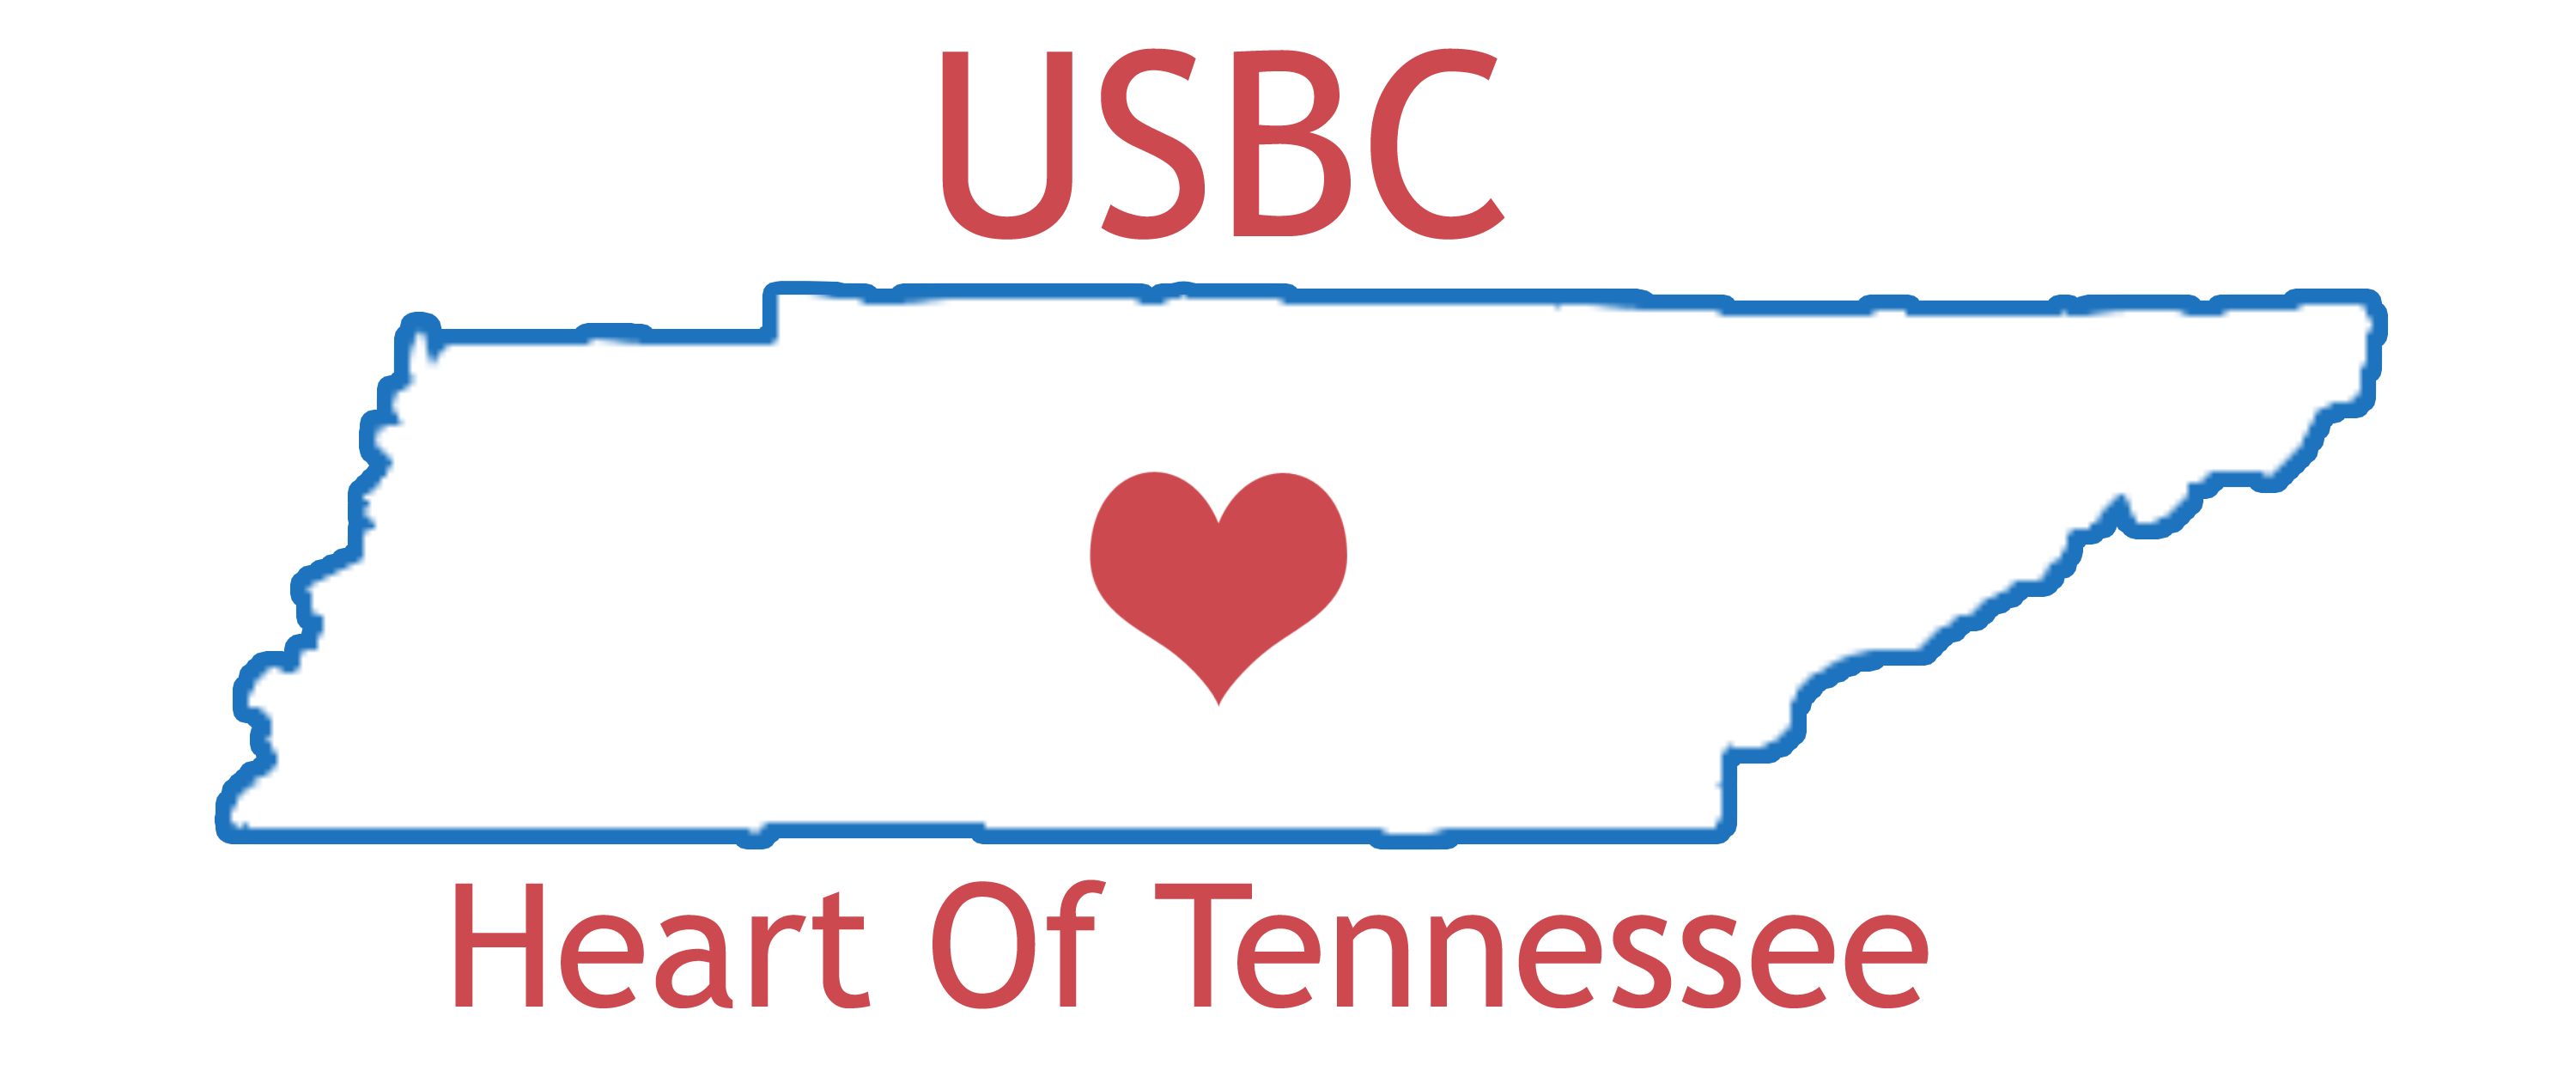 Heart Of Tennessee USBC